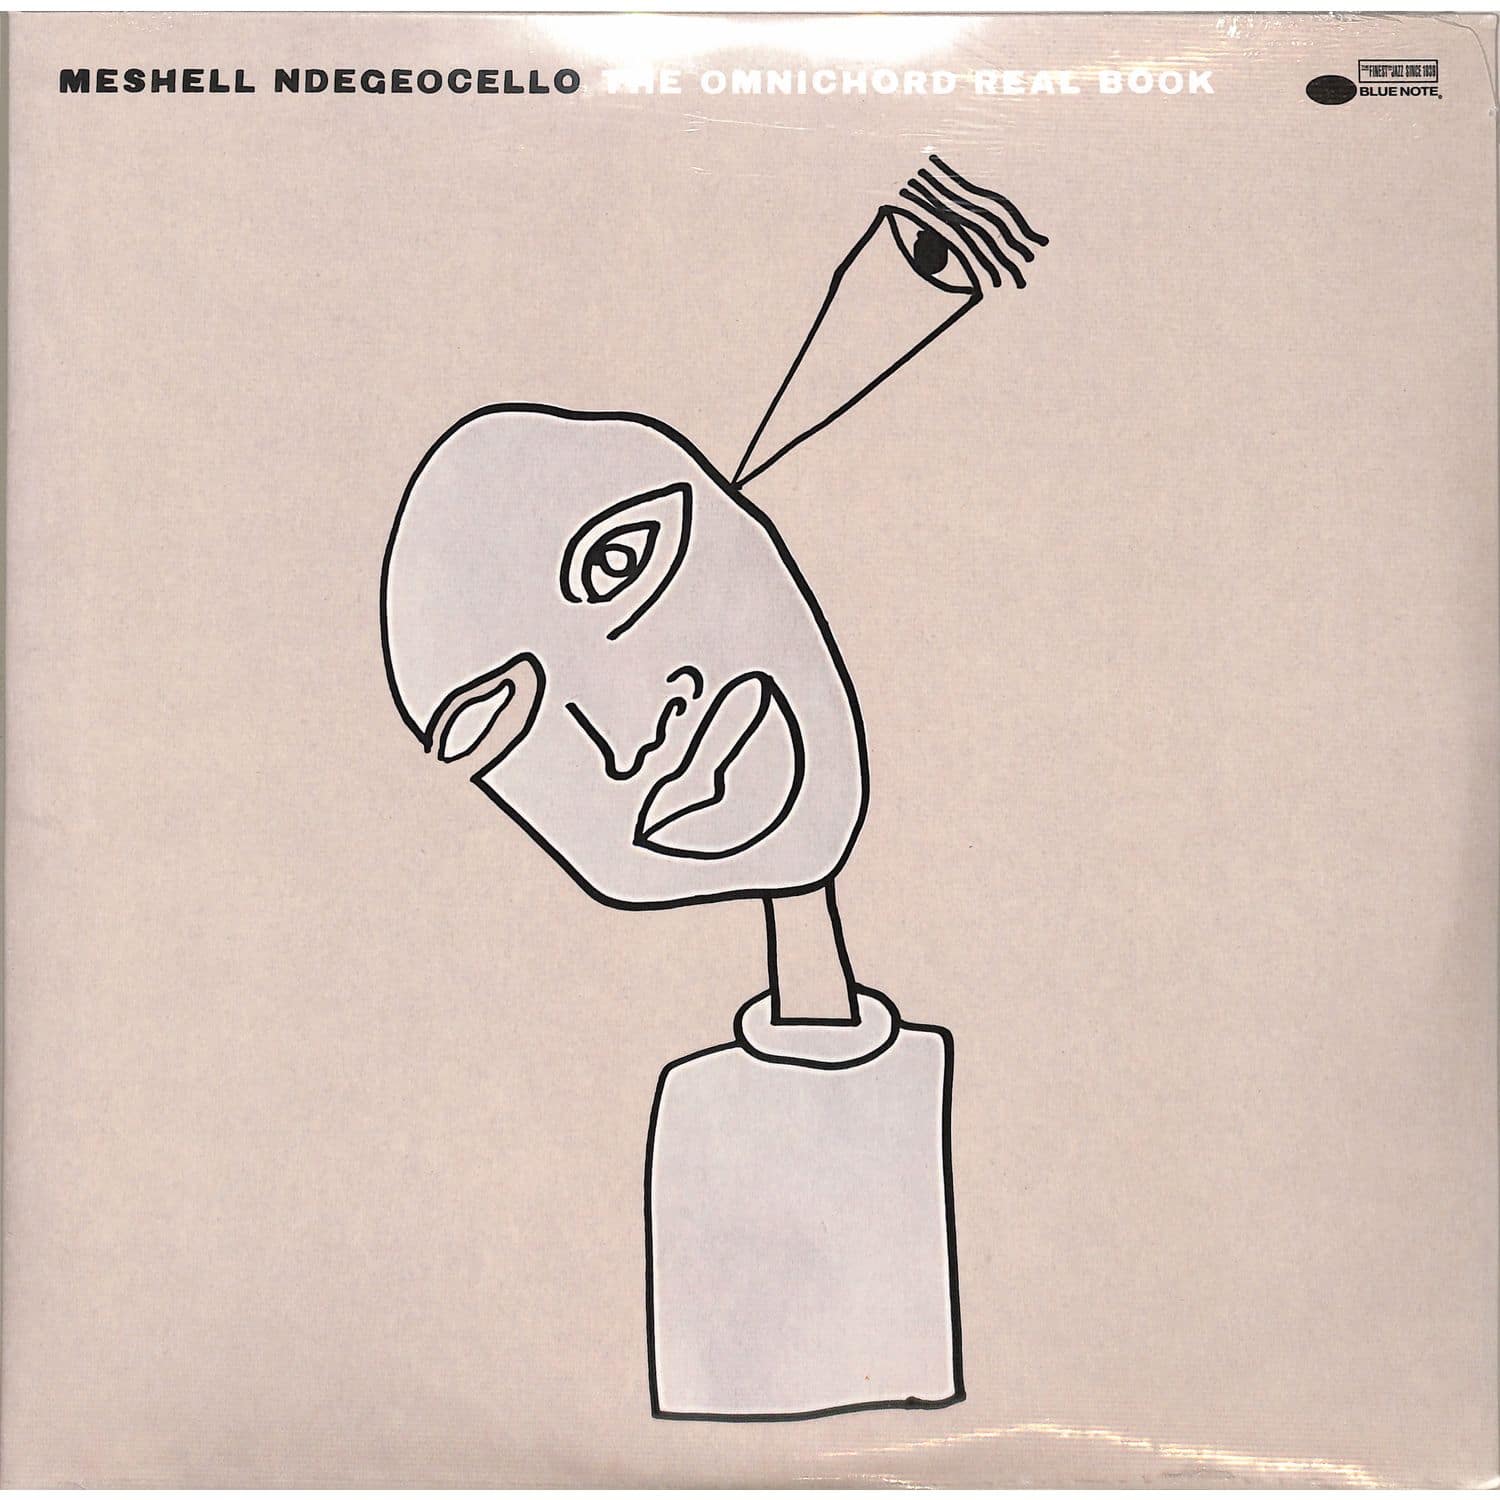 Meshell Ndegeocello - THE OMNICHORD REAL BOOK 